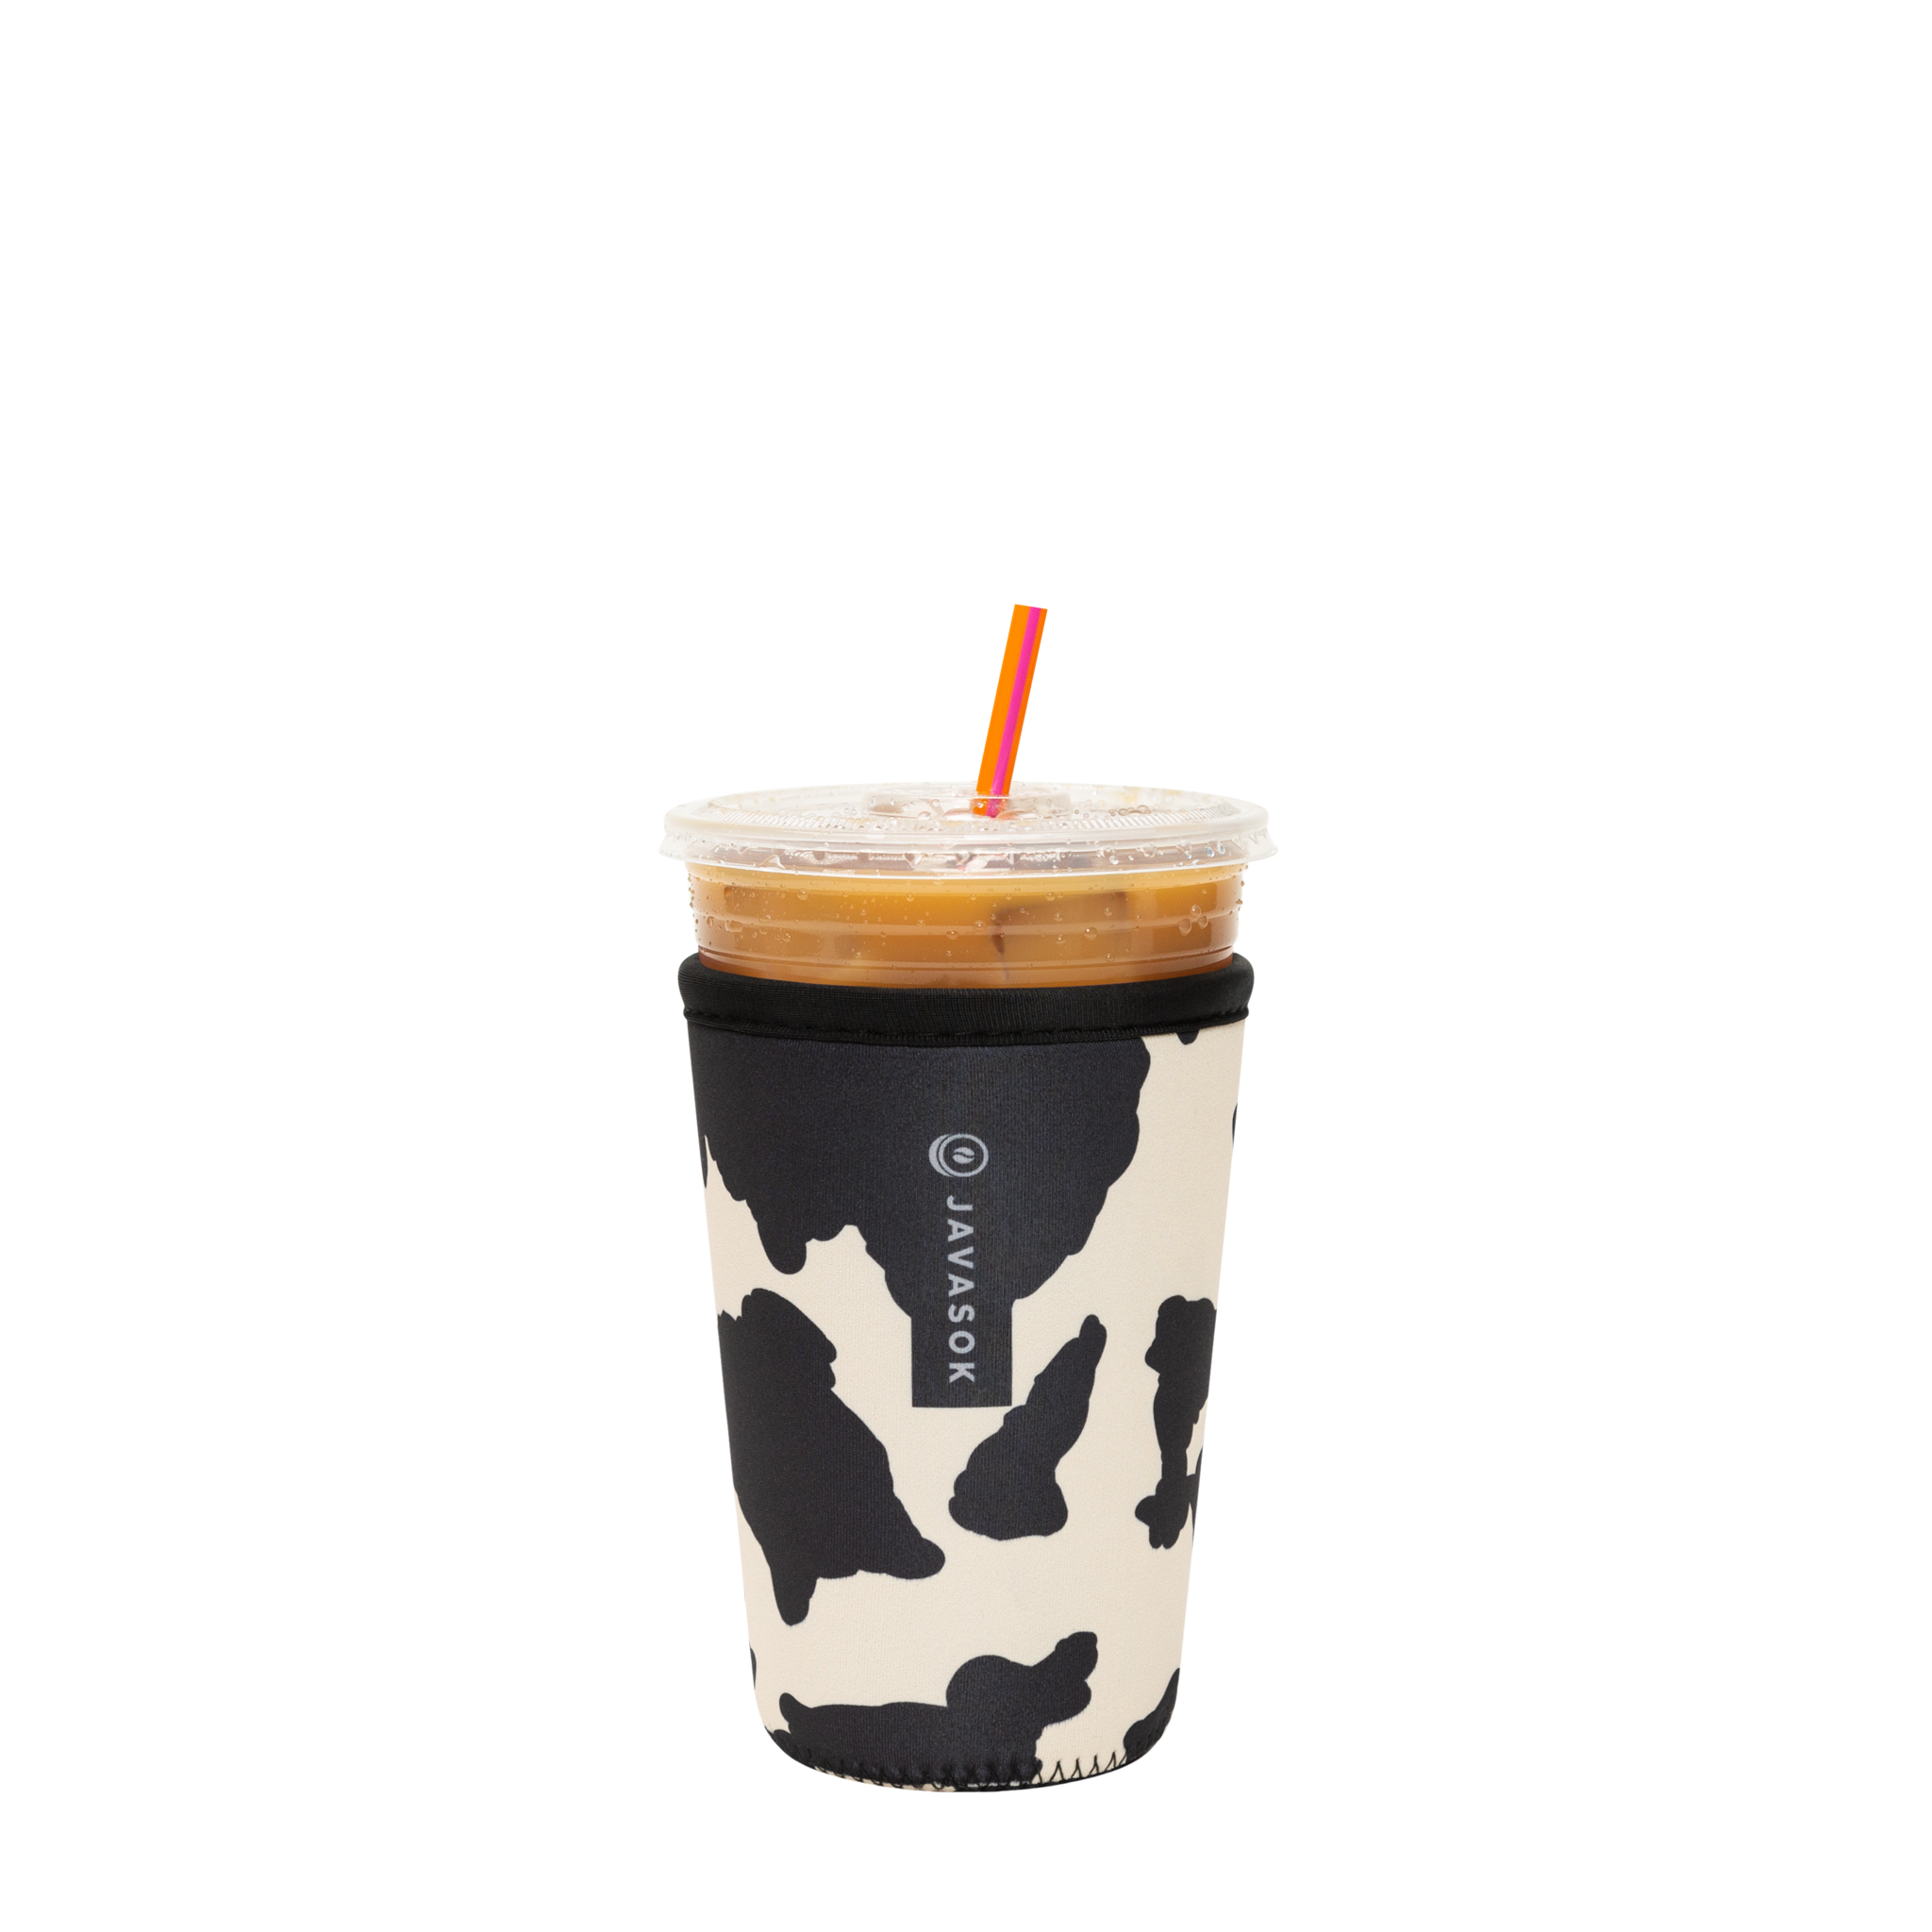 JavaSok, for iced coffee, comes in sizes from 16 oz. – 48 oz, fits nearly 85% of the cups from a variety of drink stores to pair with containers from Dunkin®, Starbucks®, and McCafé® and more. PintSok patterns are also now featured in the CanSok and JavaSok lines.